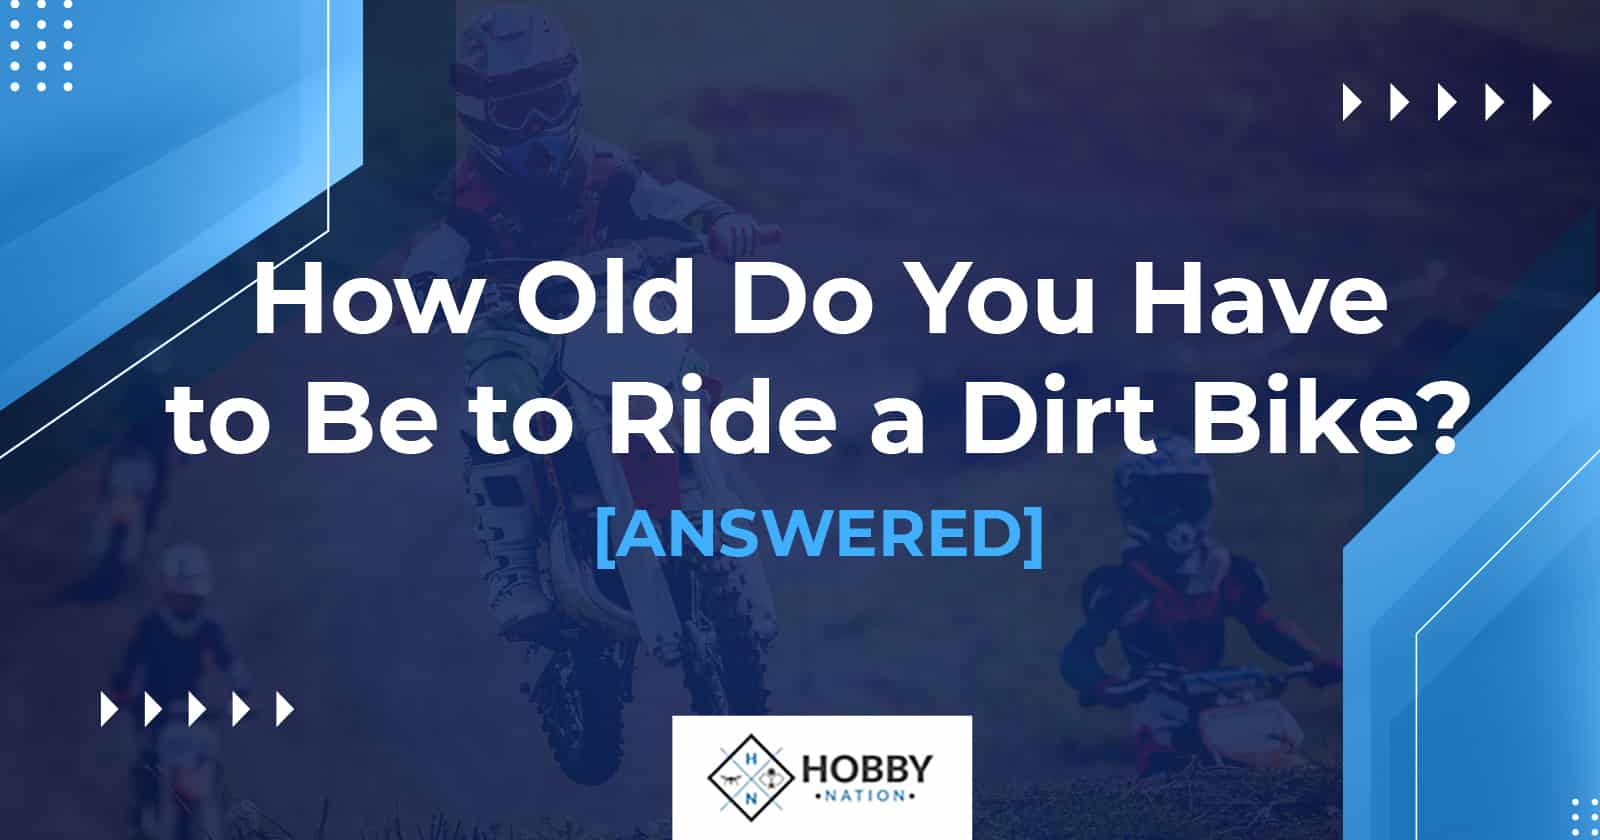 How Old Do You Have to Be to Ride a Dirt Bike? [ANSWERED]